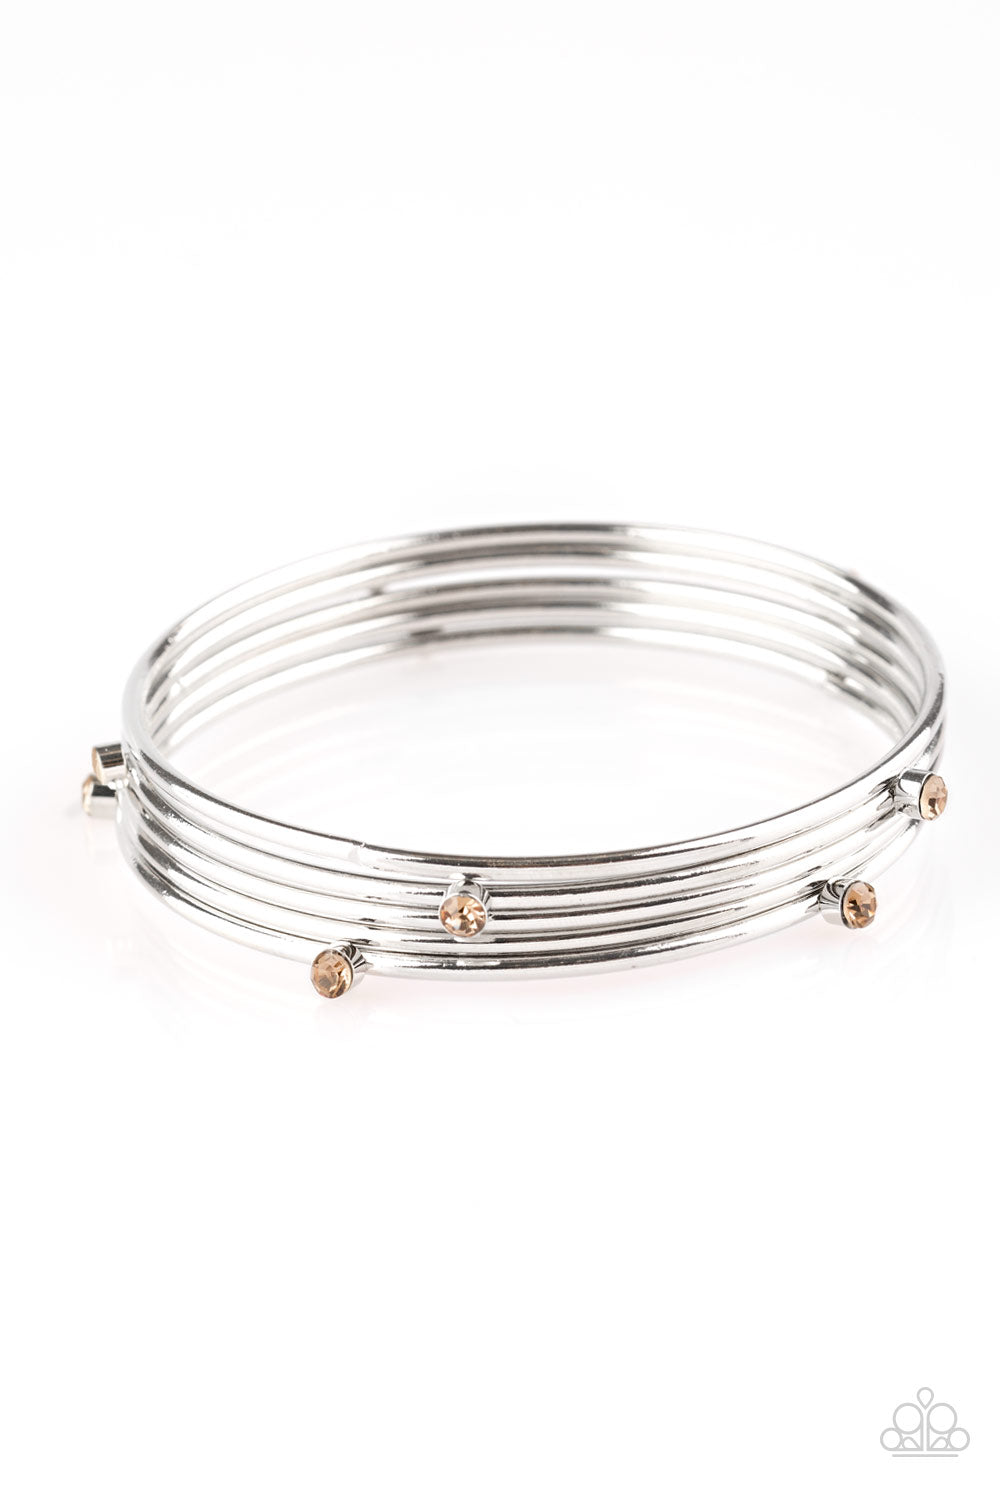 Paparazzi Bracelet with three shiny silver and two topaz rhinestone encrusted bangles stack across the wrist for a refined look.